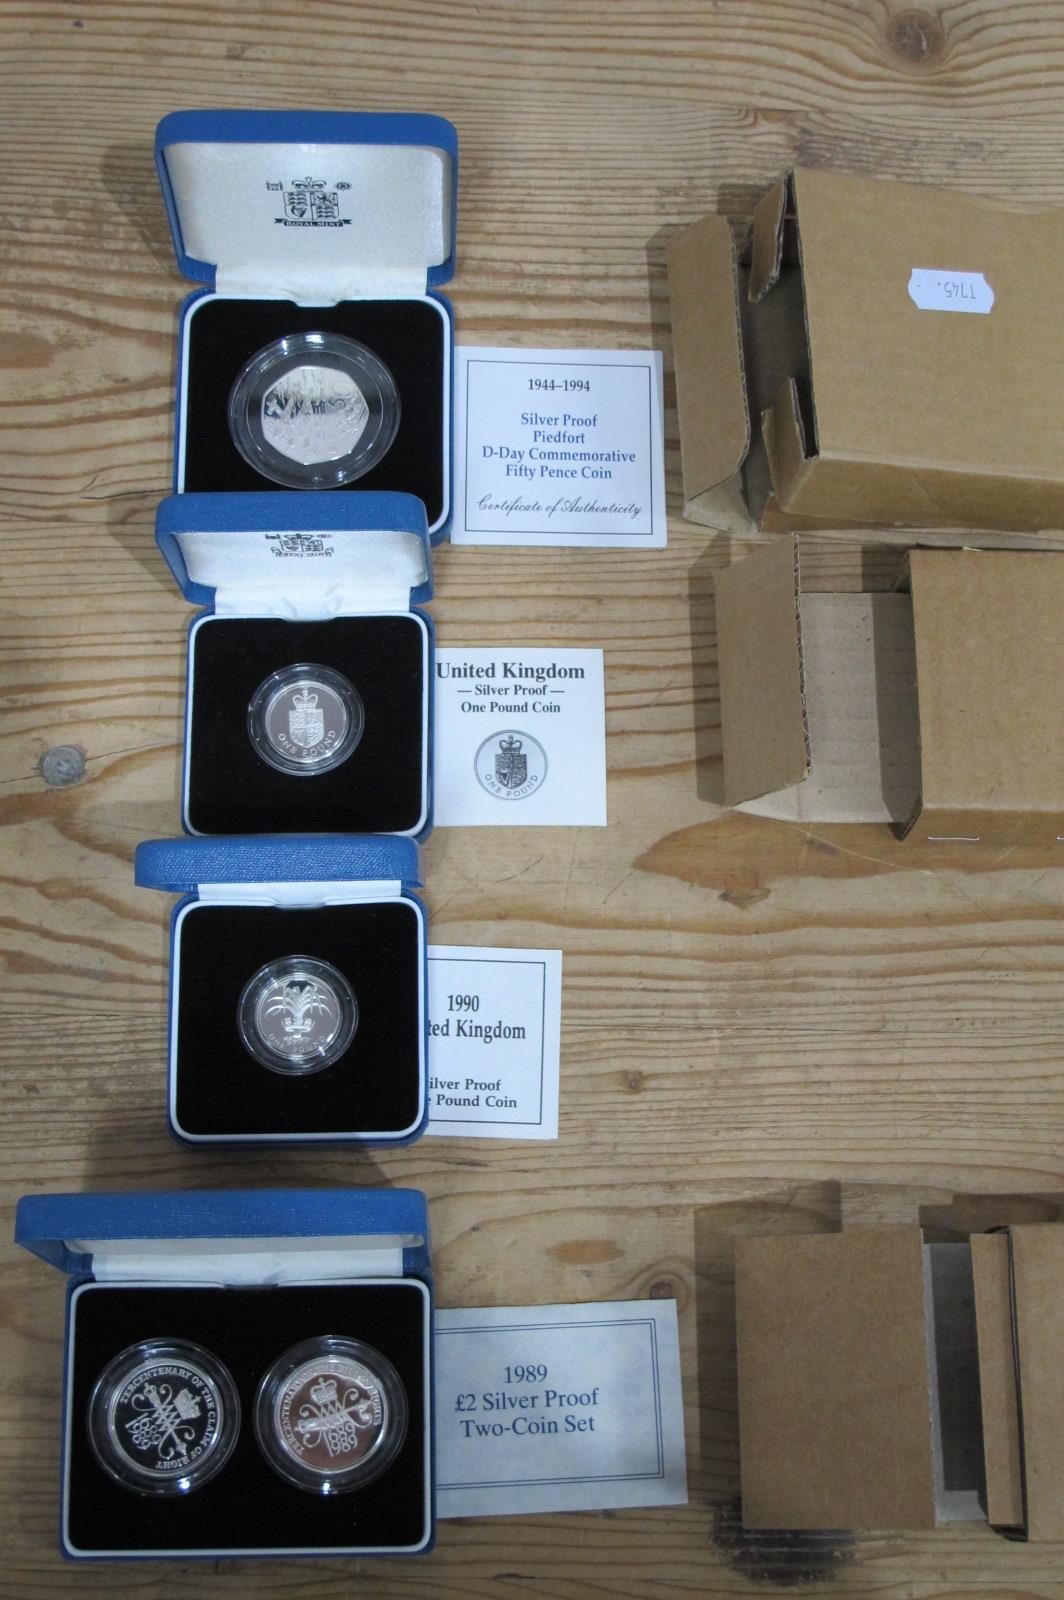 Four Royal Mint Silver Proof Coins, 1988? One Pound, 1990 One Pound, 1994 D-Day Fifty Pence, 1989